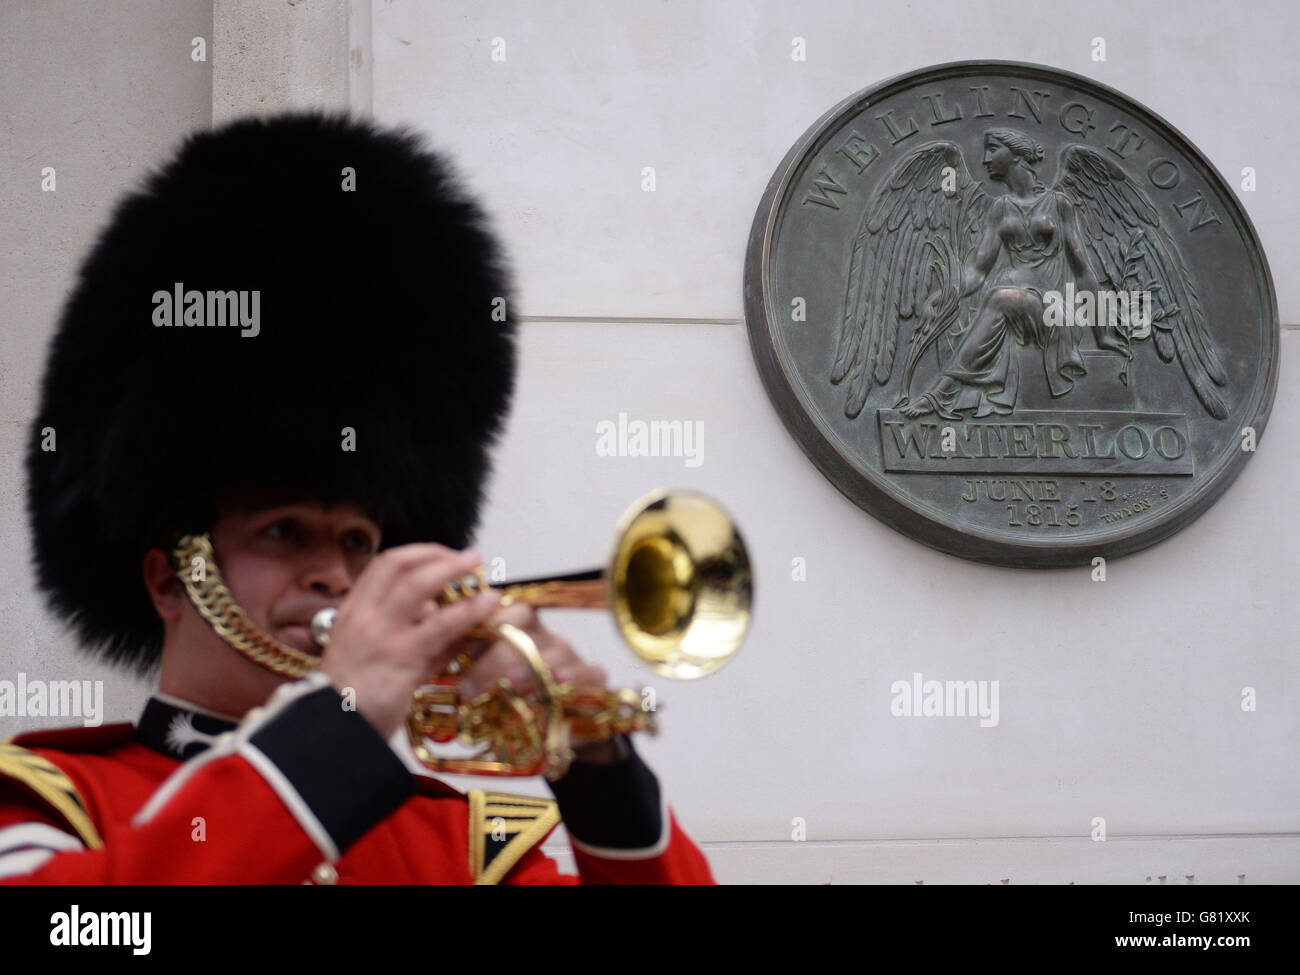 Lance Corporal Nick Walkley plays the Last Post after the unveiling of a memorial in honour of the thousands of soldiers who fought and died in the Battle of Waterloo at Waterloo Station, London, to mark the event's 200th anniversary. Stock Photo